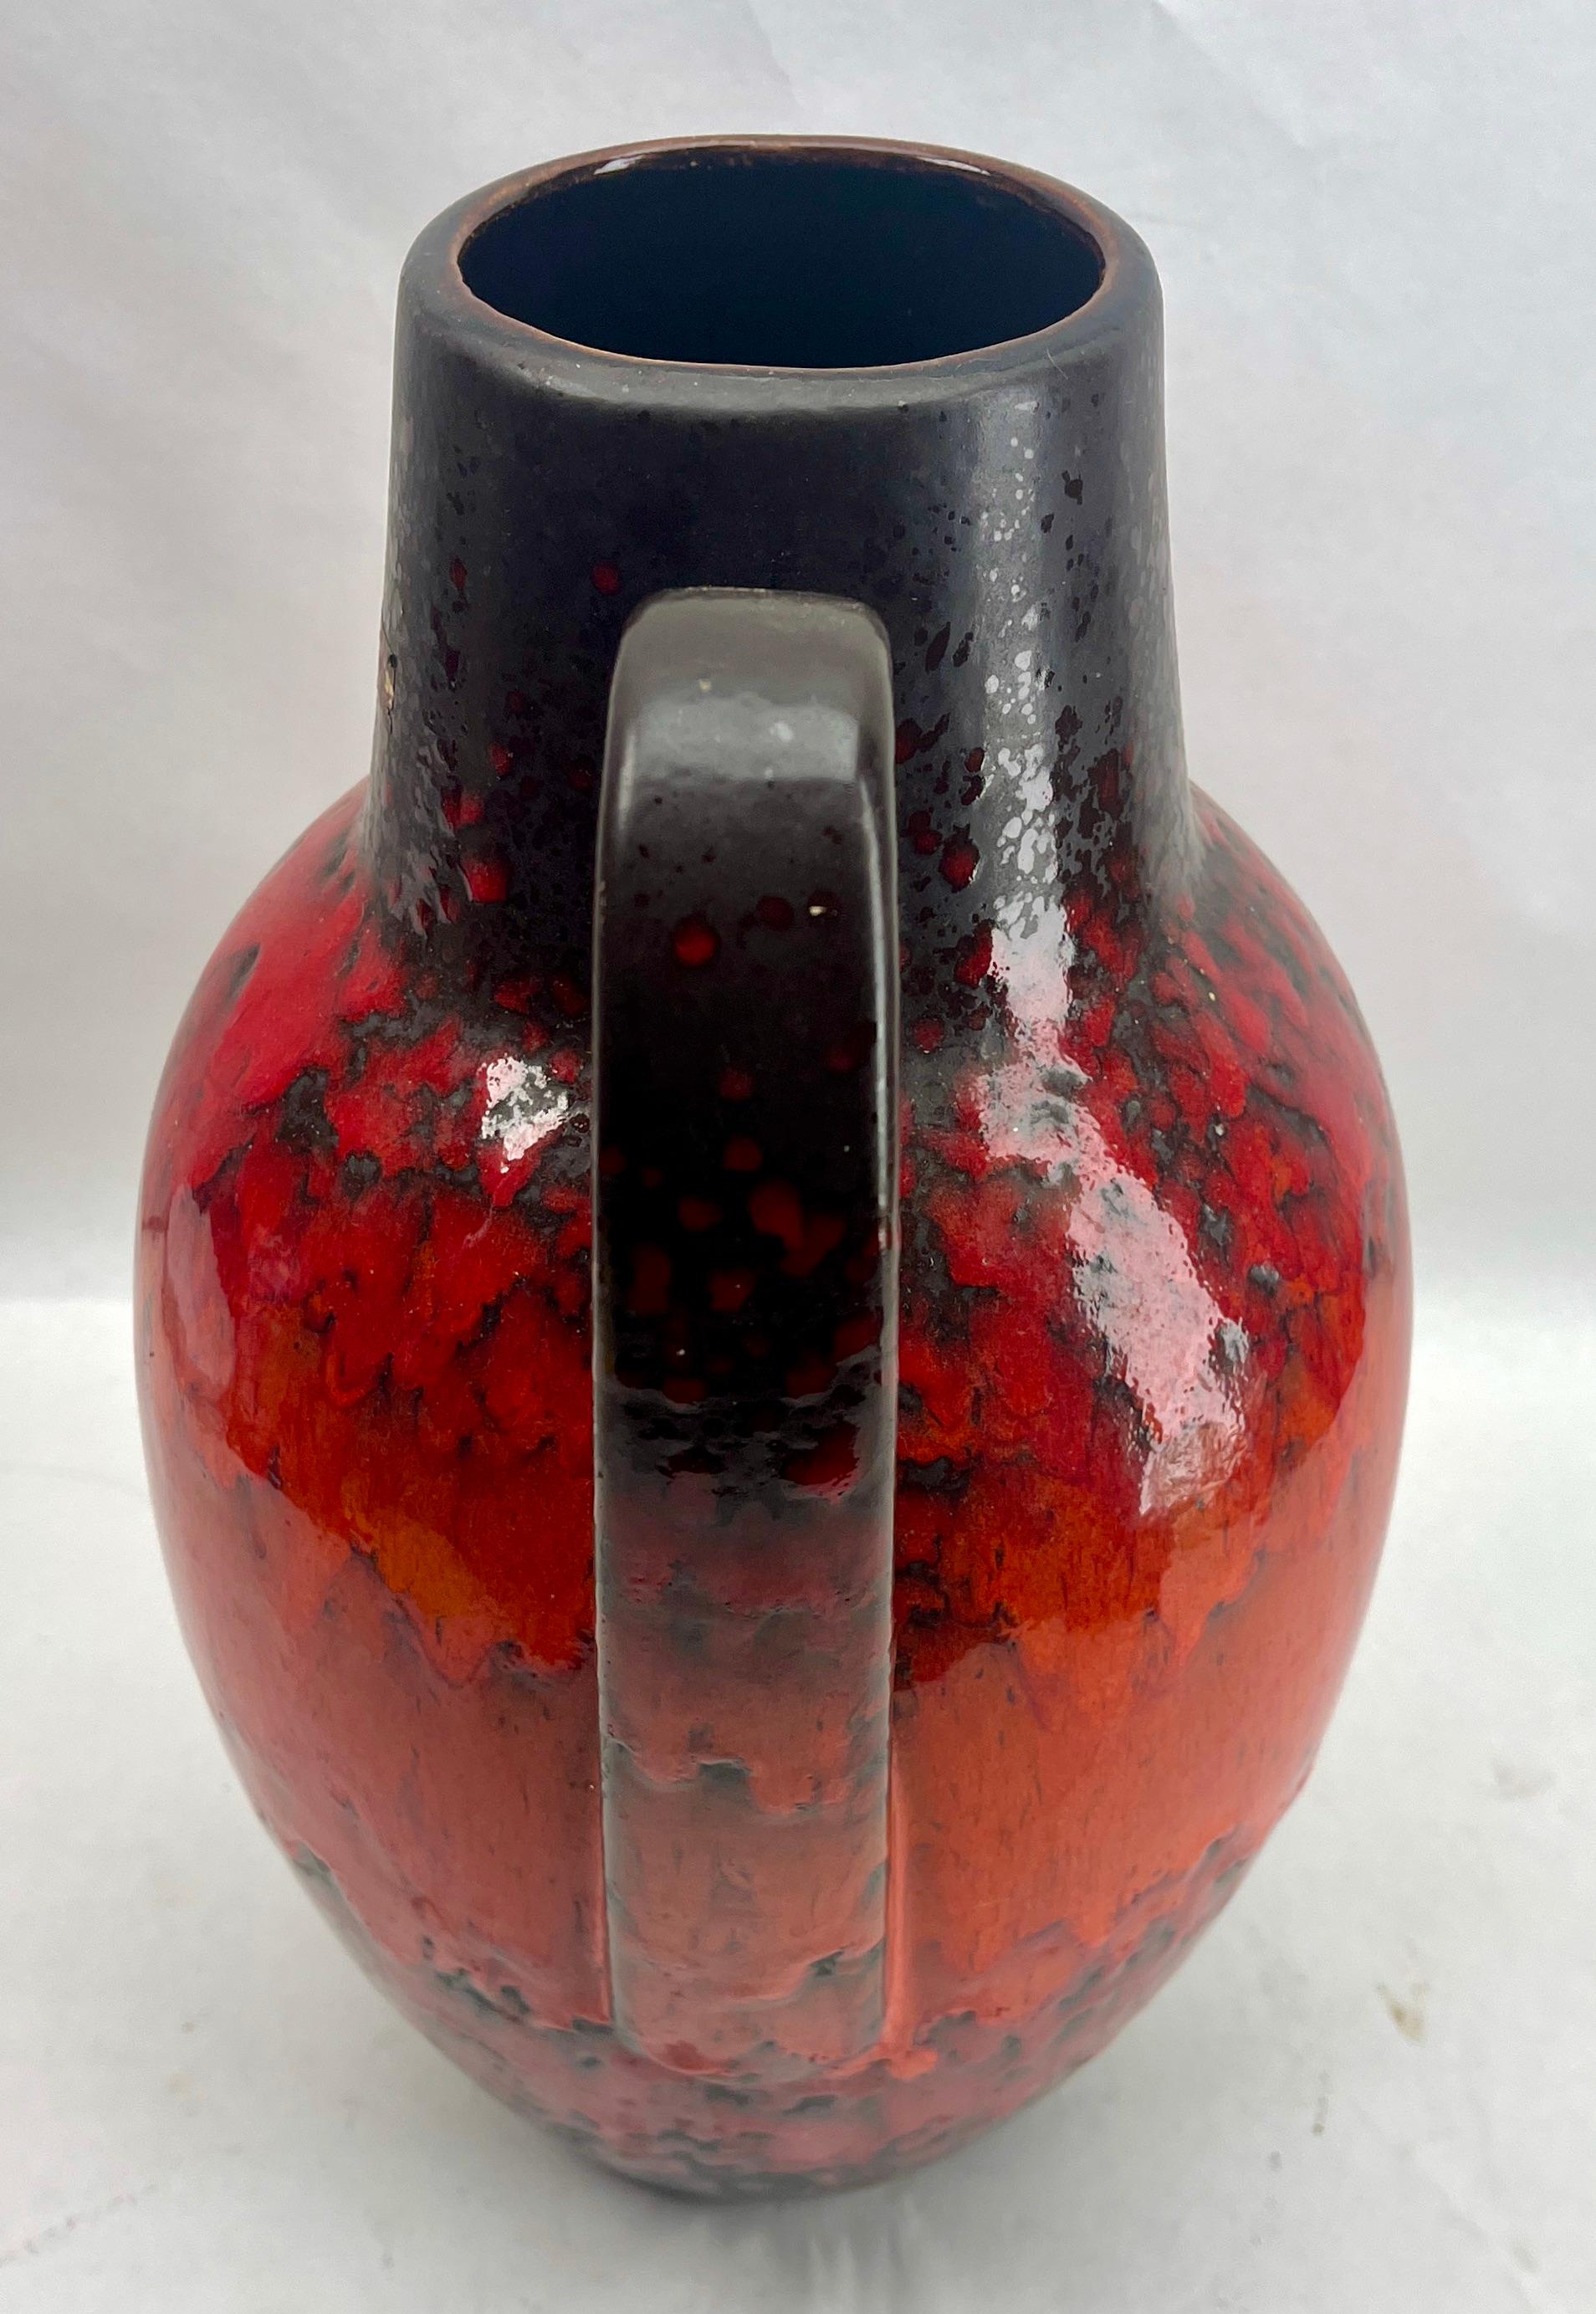 Ceramic Fat Lava Floor Vase with Red Drip-Glaze 'Scheurich 279-38, W-Germany' 1960s For Sale